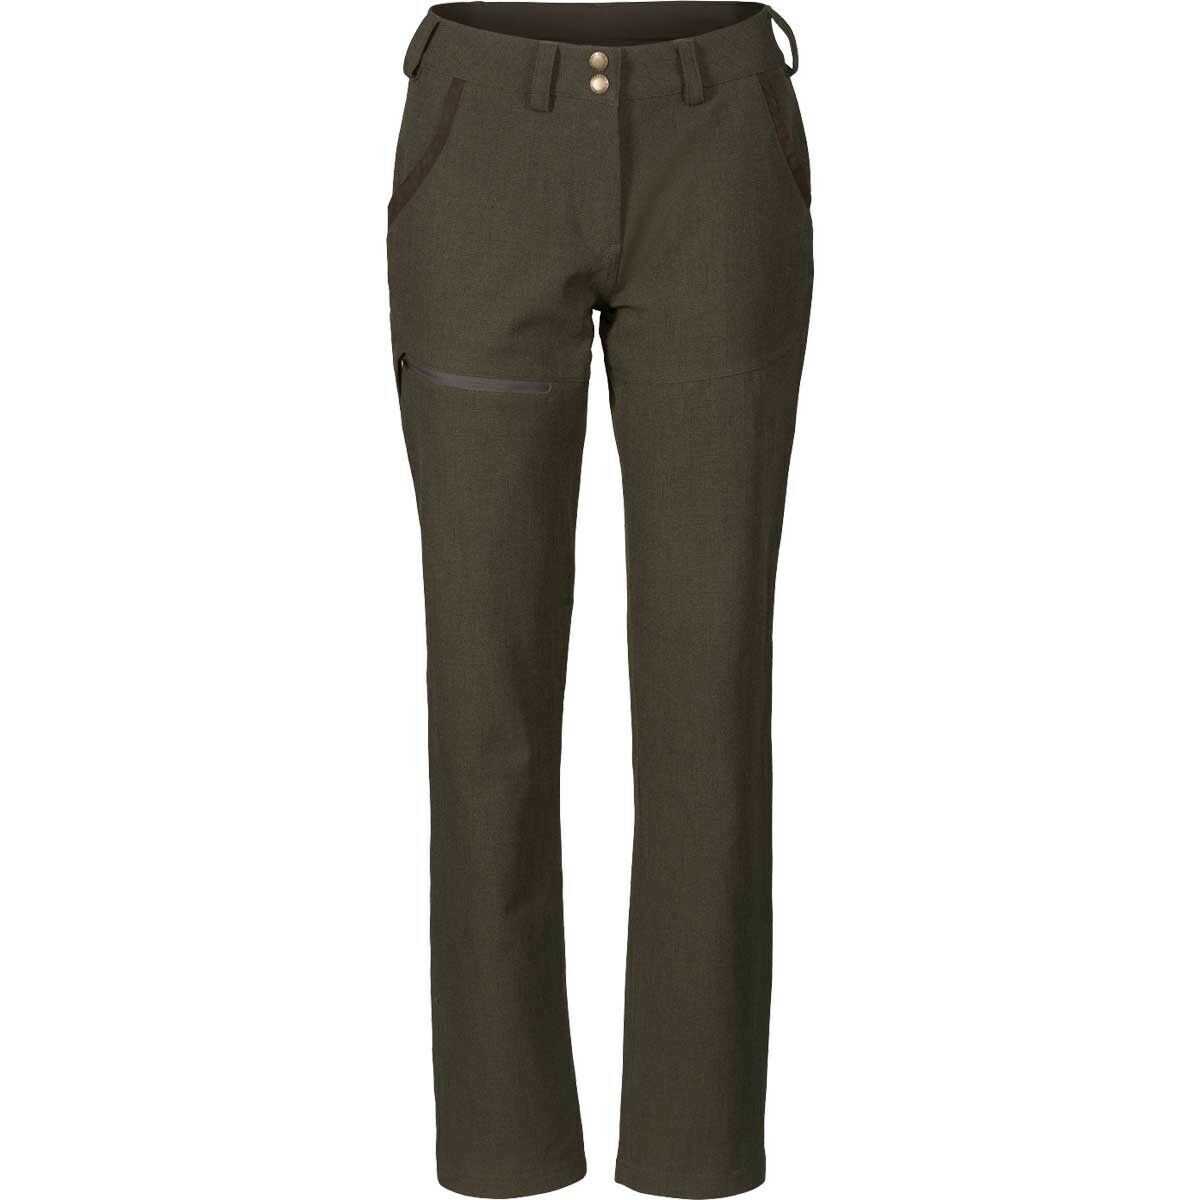 Seeland Women's Woodcock Advanced Trousers - Willow Green